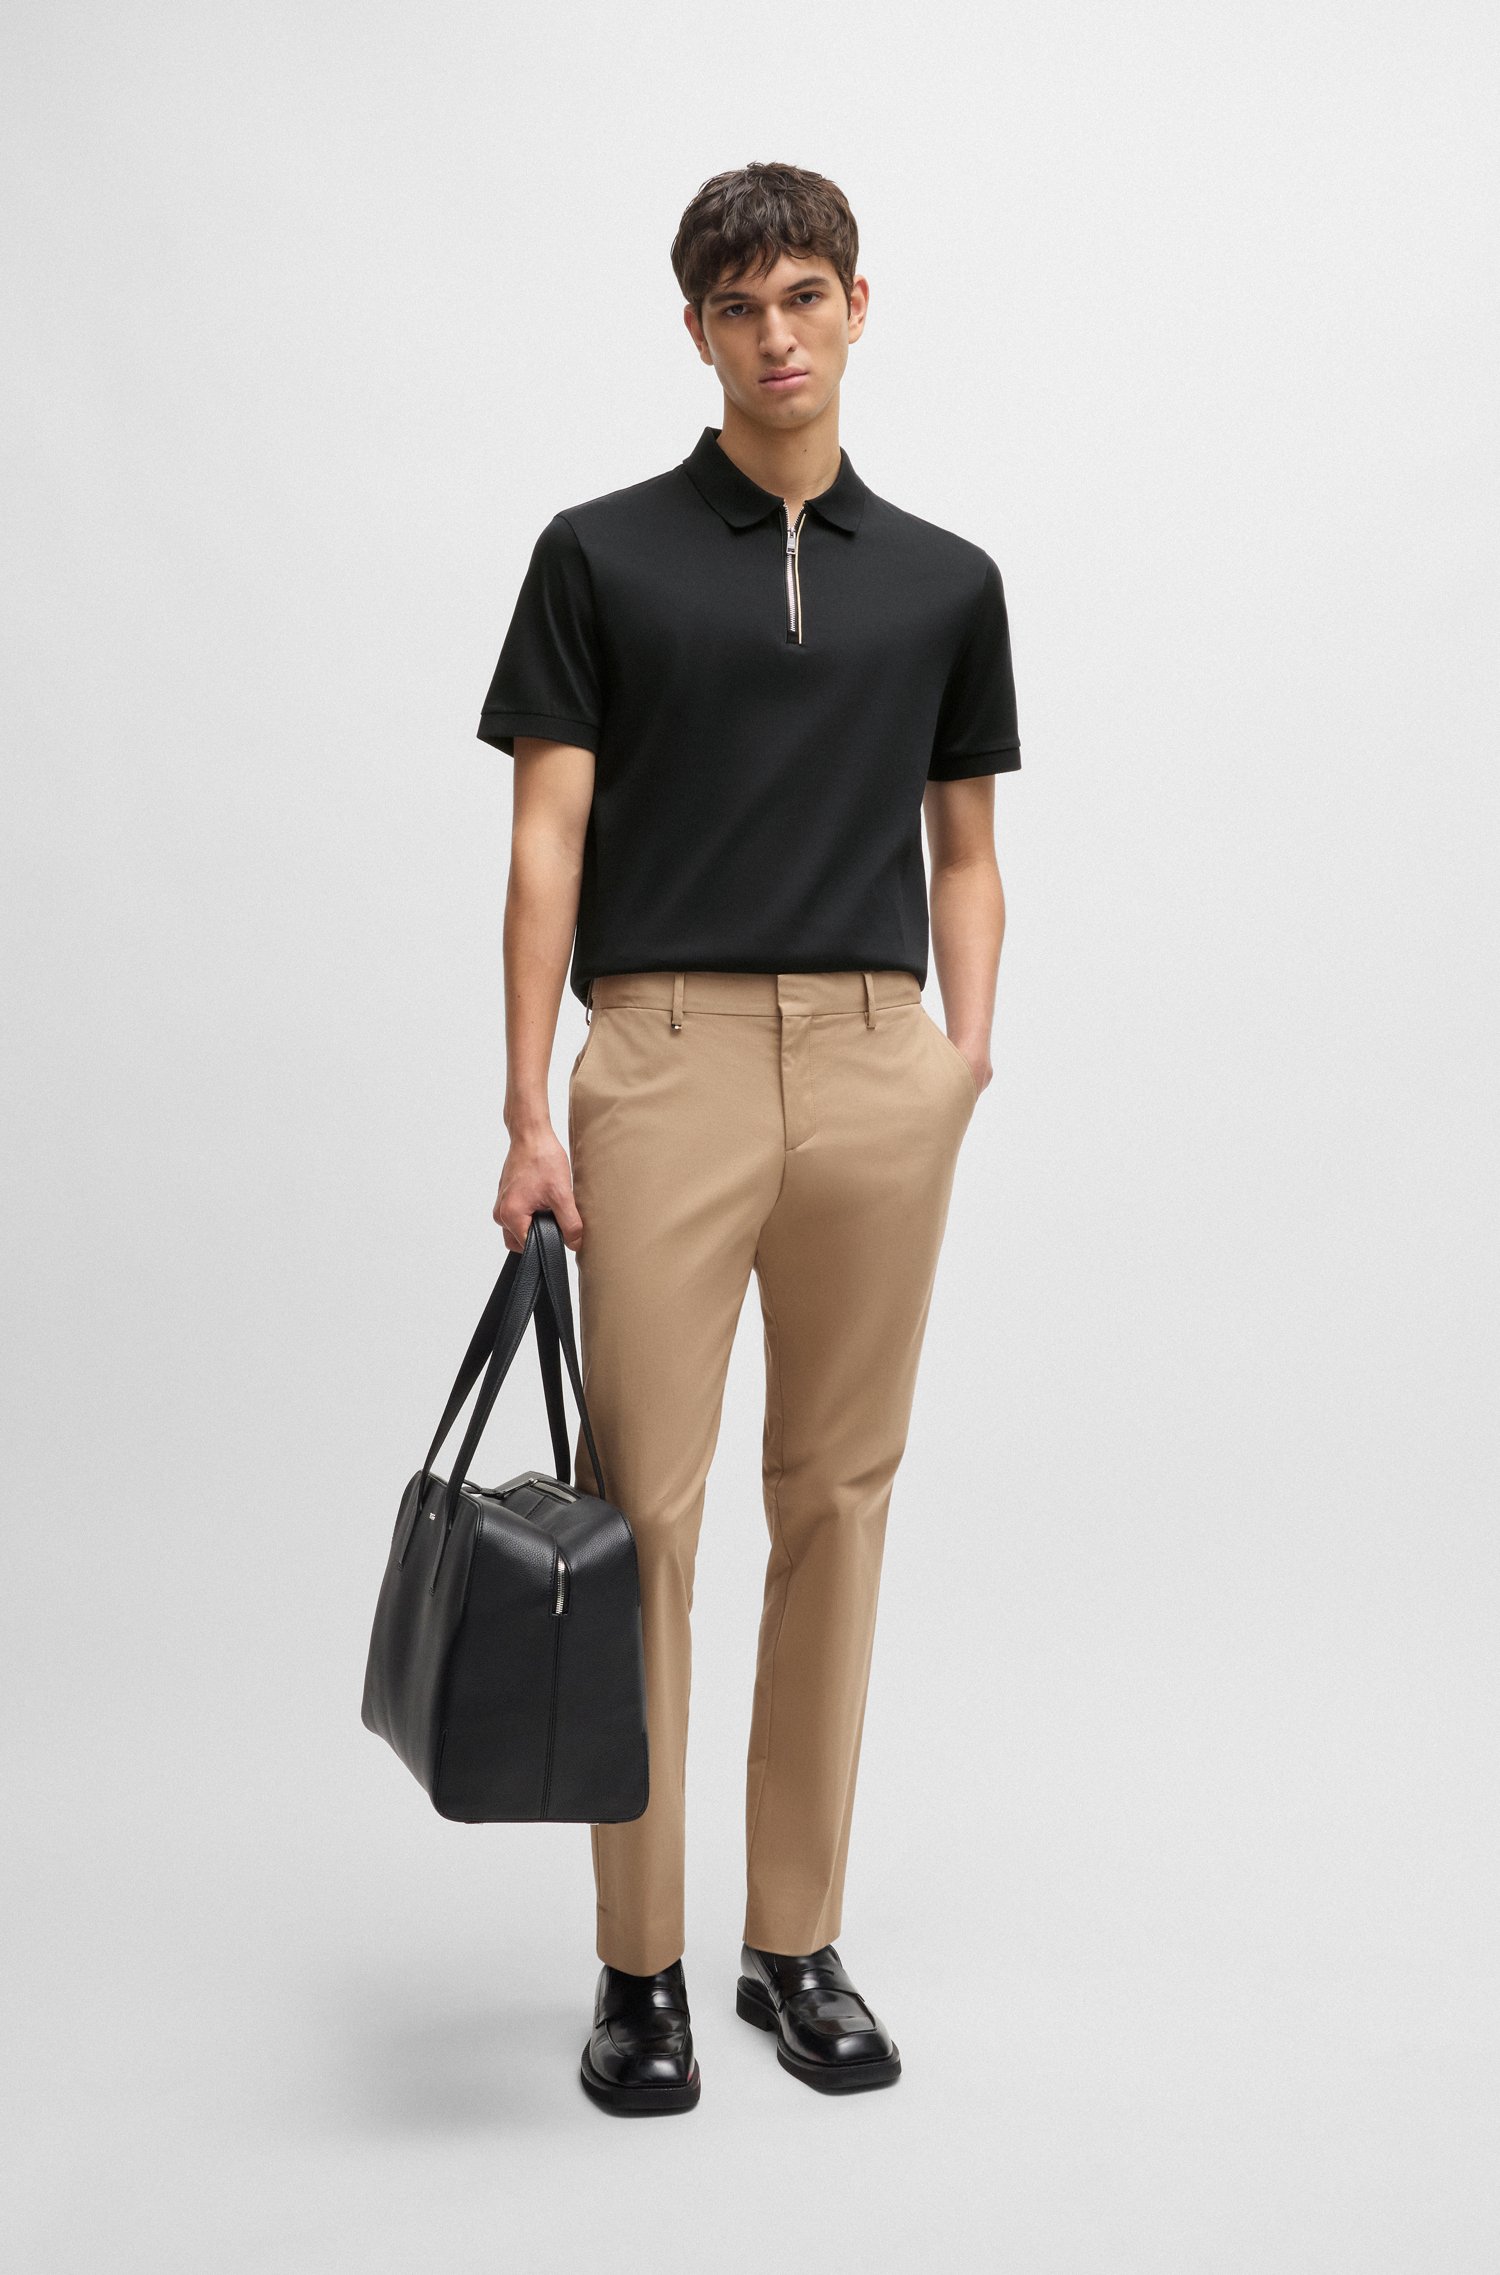 Mercerized-cotton slim-fit polo shirt with zip placket